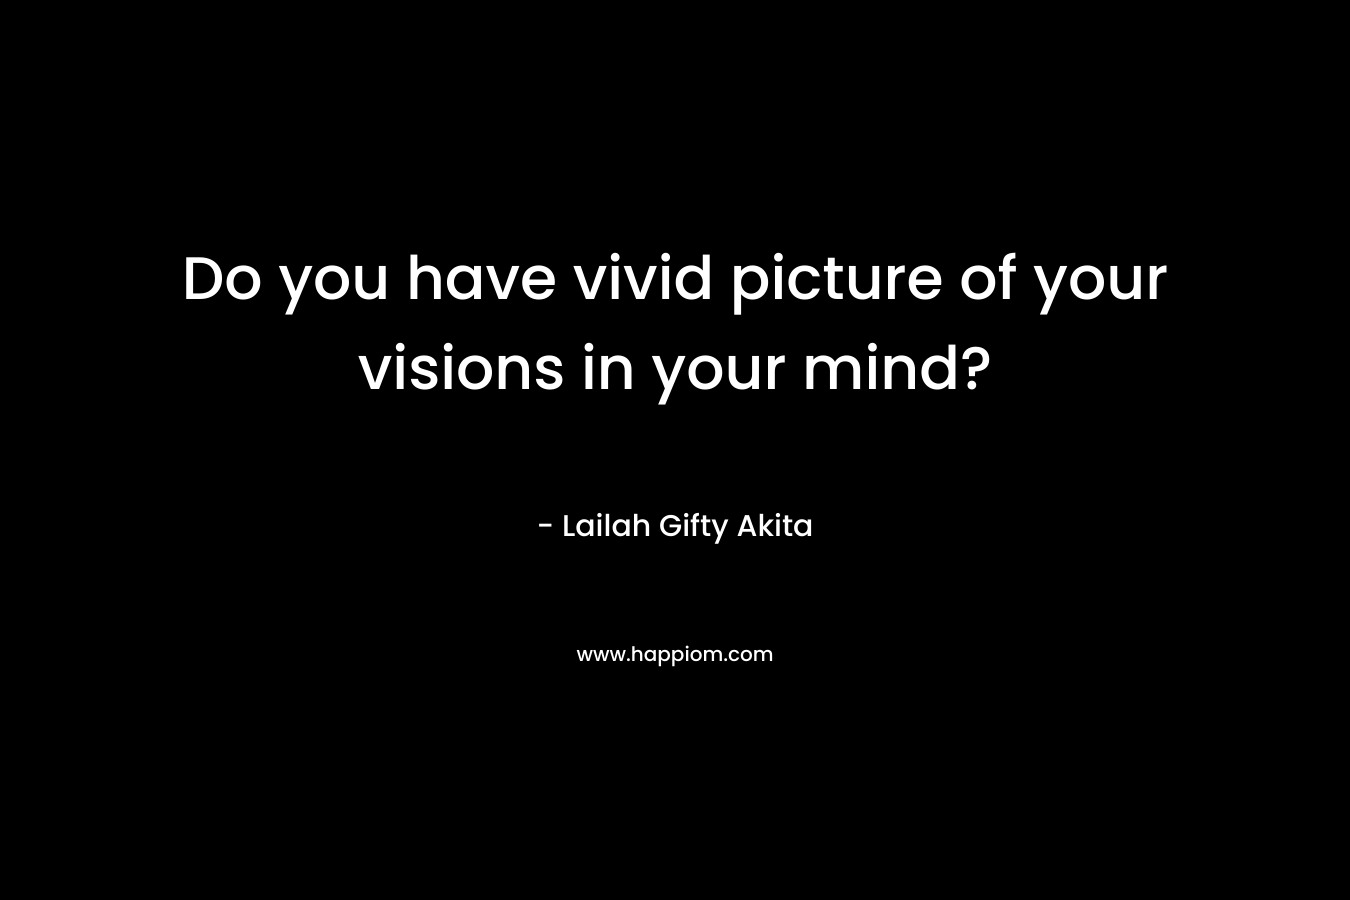 Do you have vivid picture of your visions in your mind?